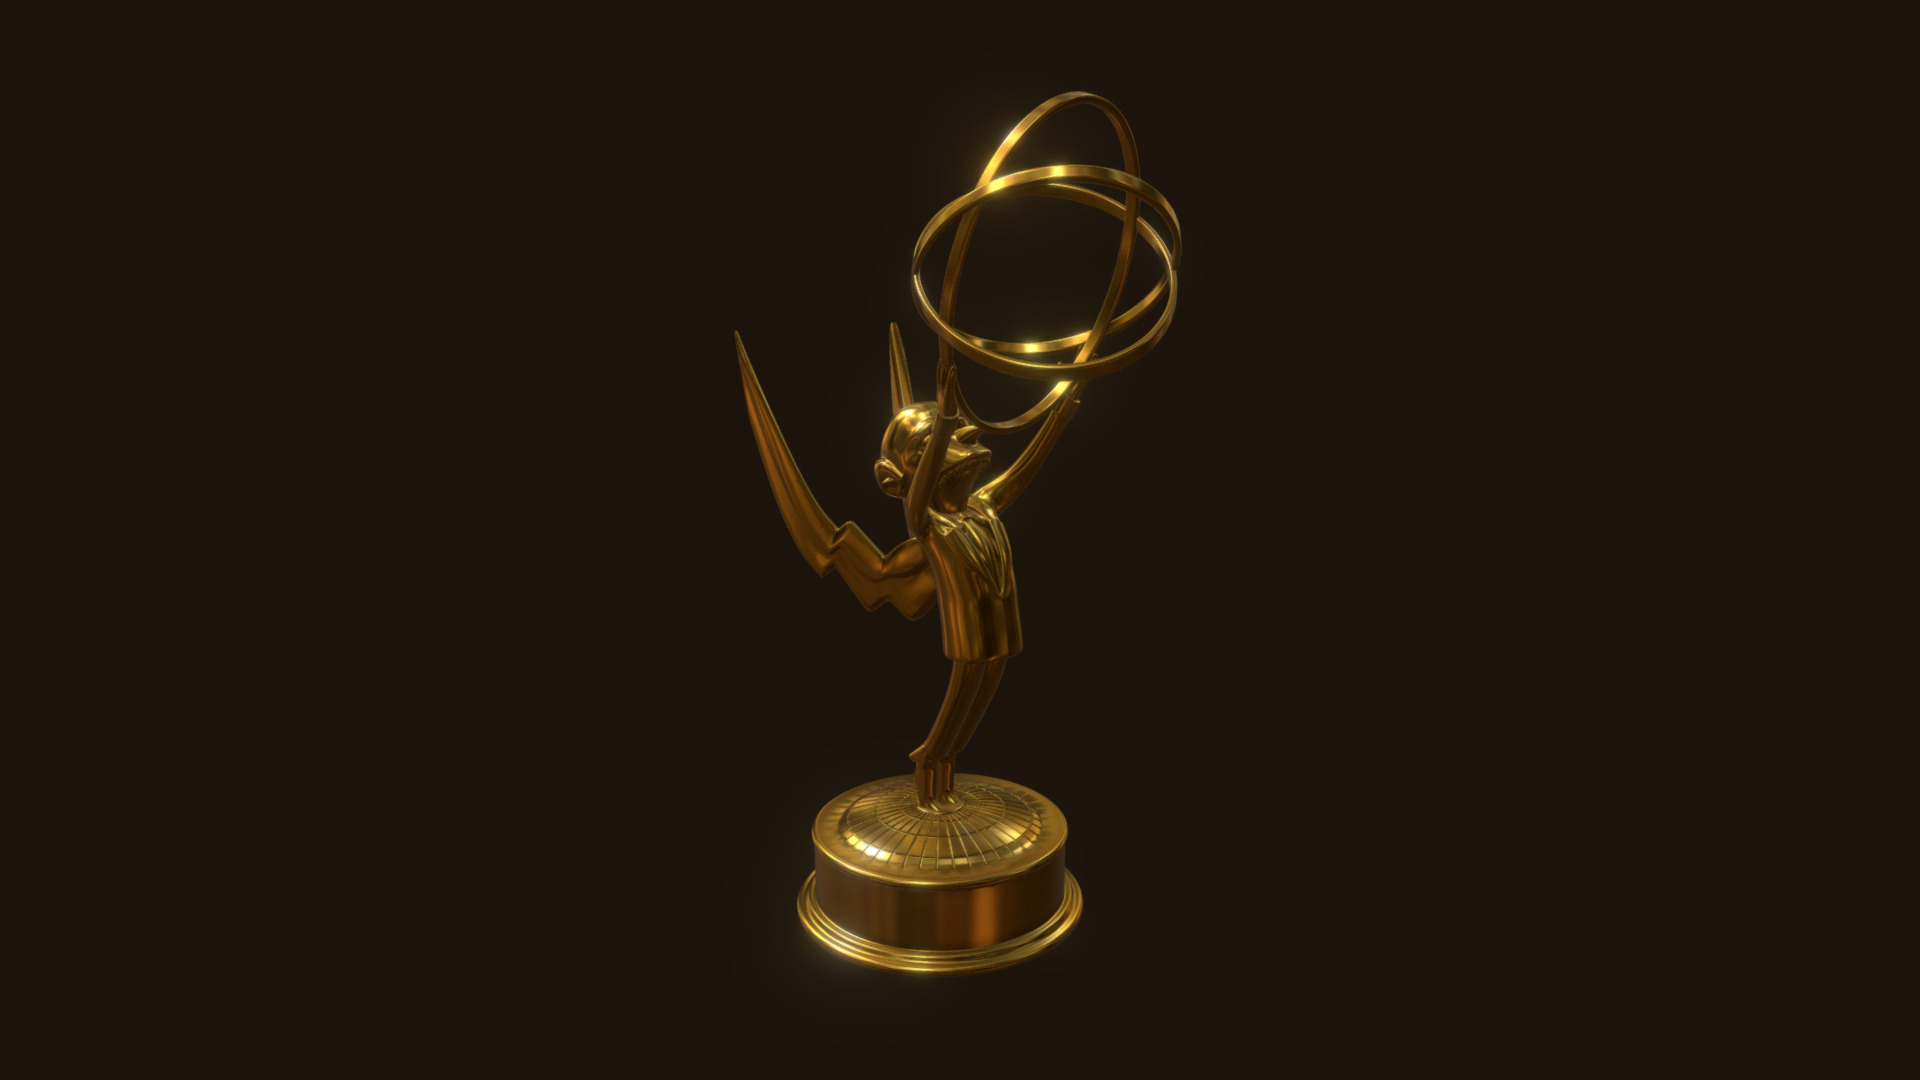 3D model Montgomery award - This is a 3D model of the Montgomery award. The 3D model is about a golden trophy with a black background.